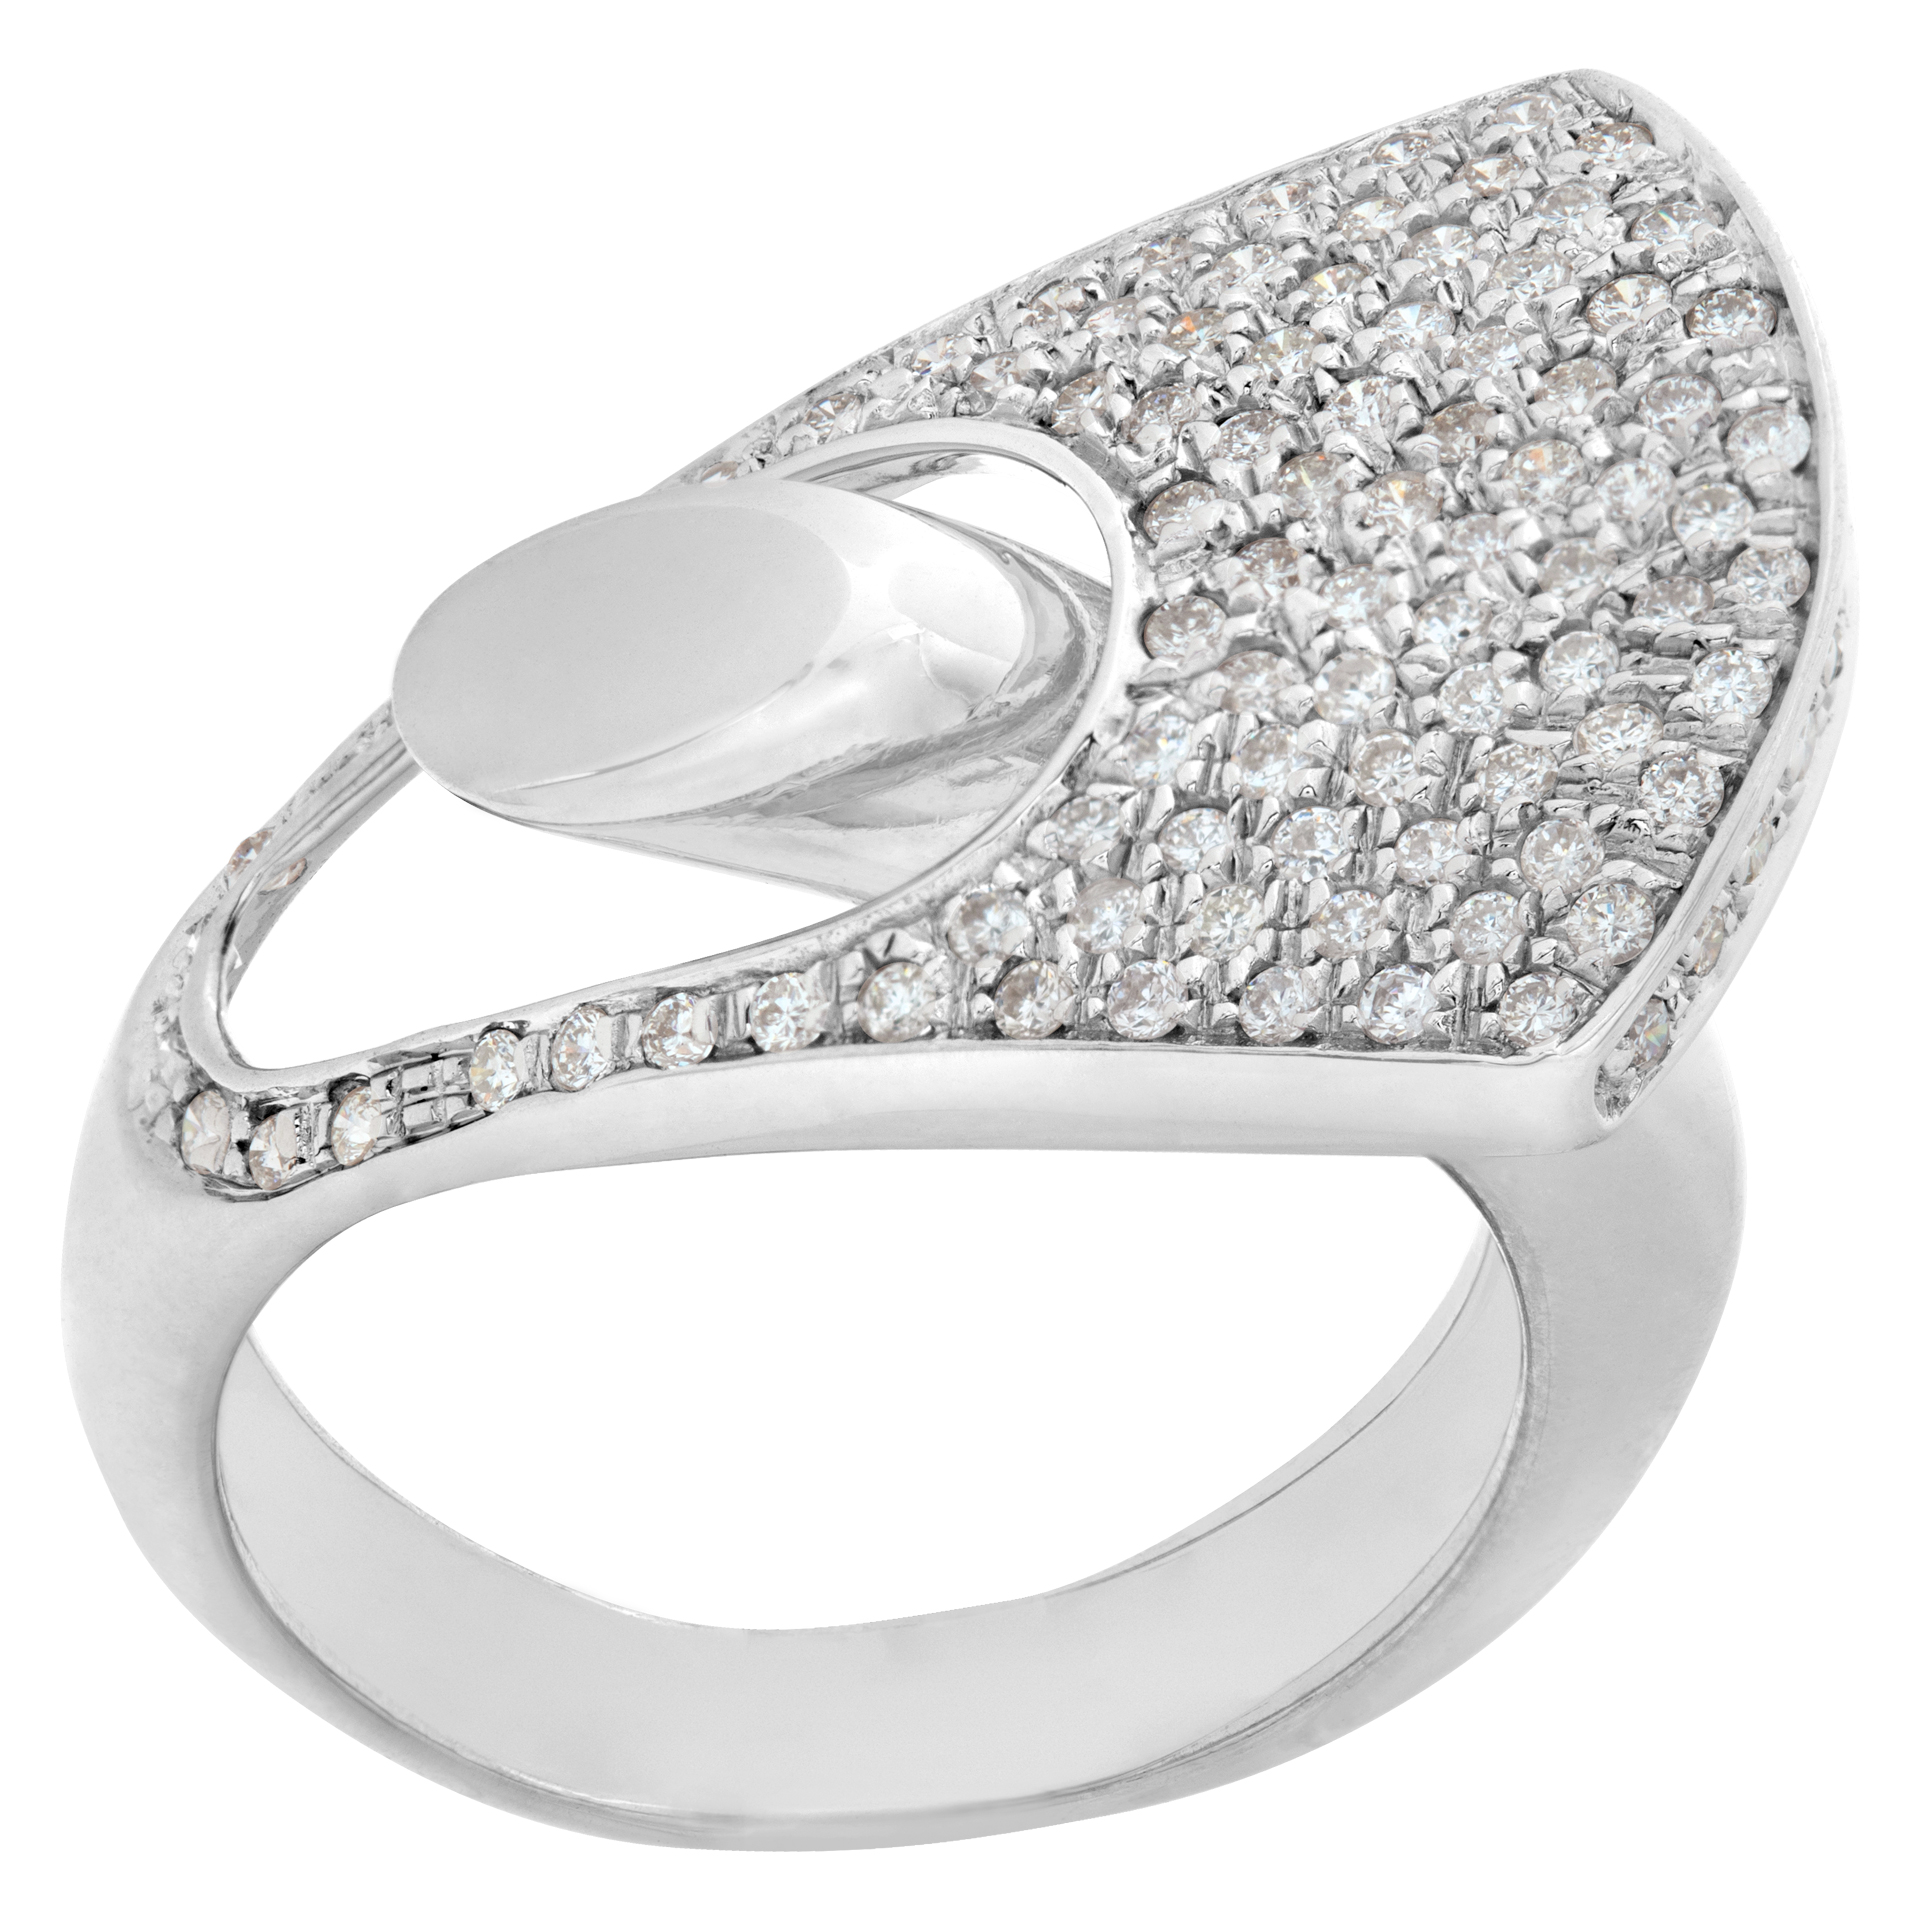 Pave diamond bypass ring in 18k white gold with over 1 carats in pave set round brilliant cut diamonds